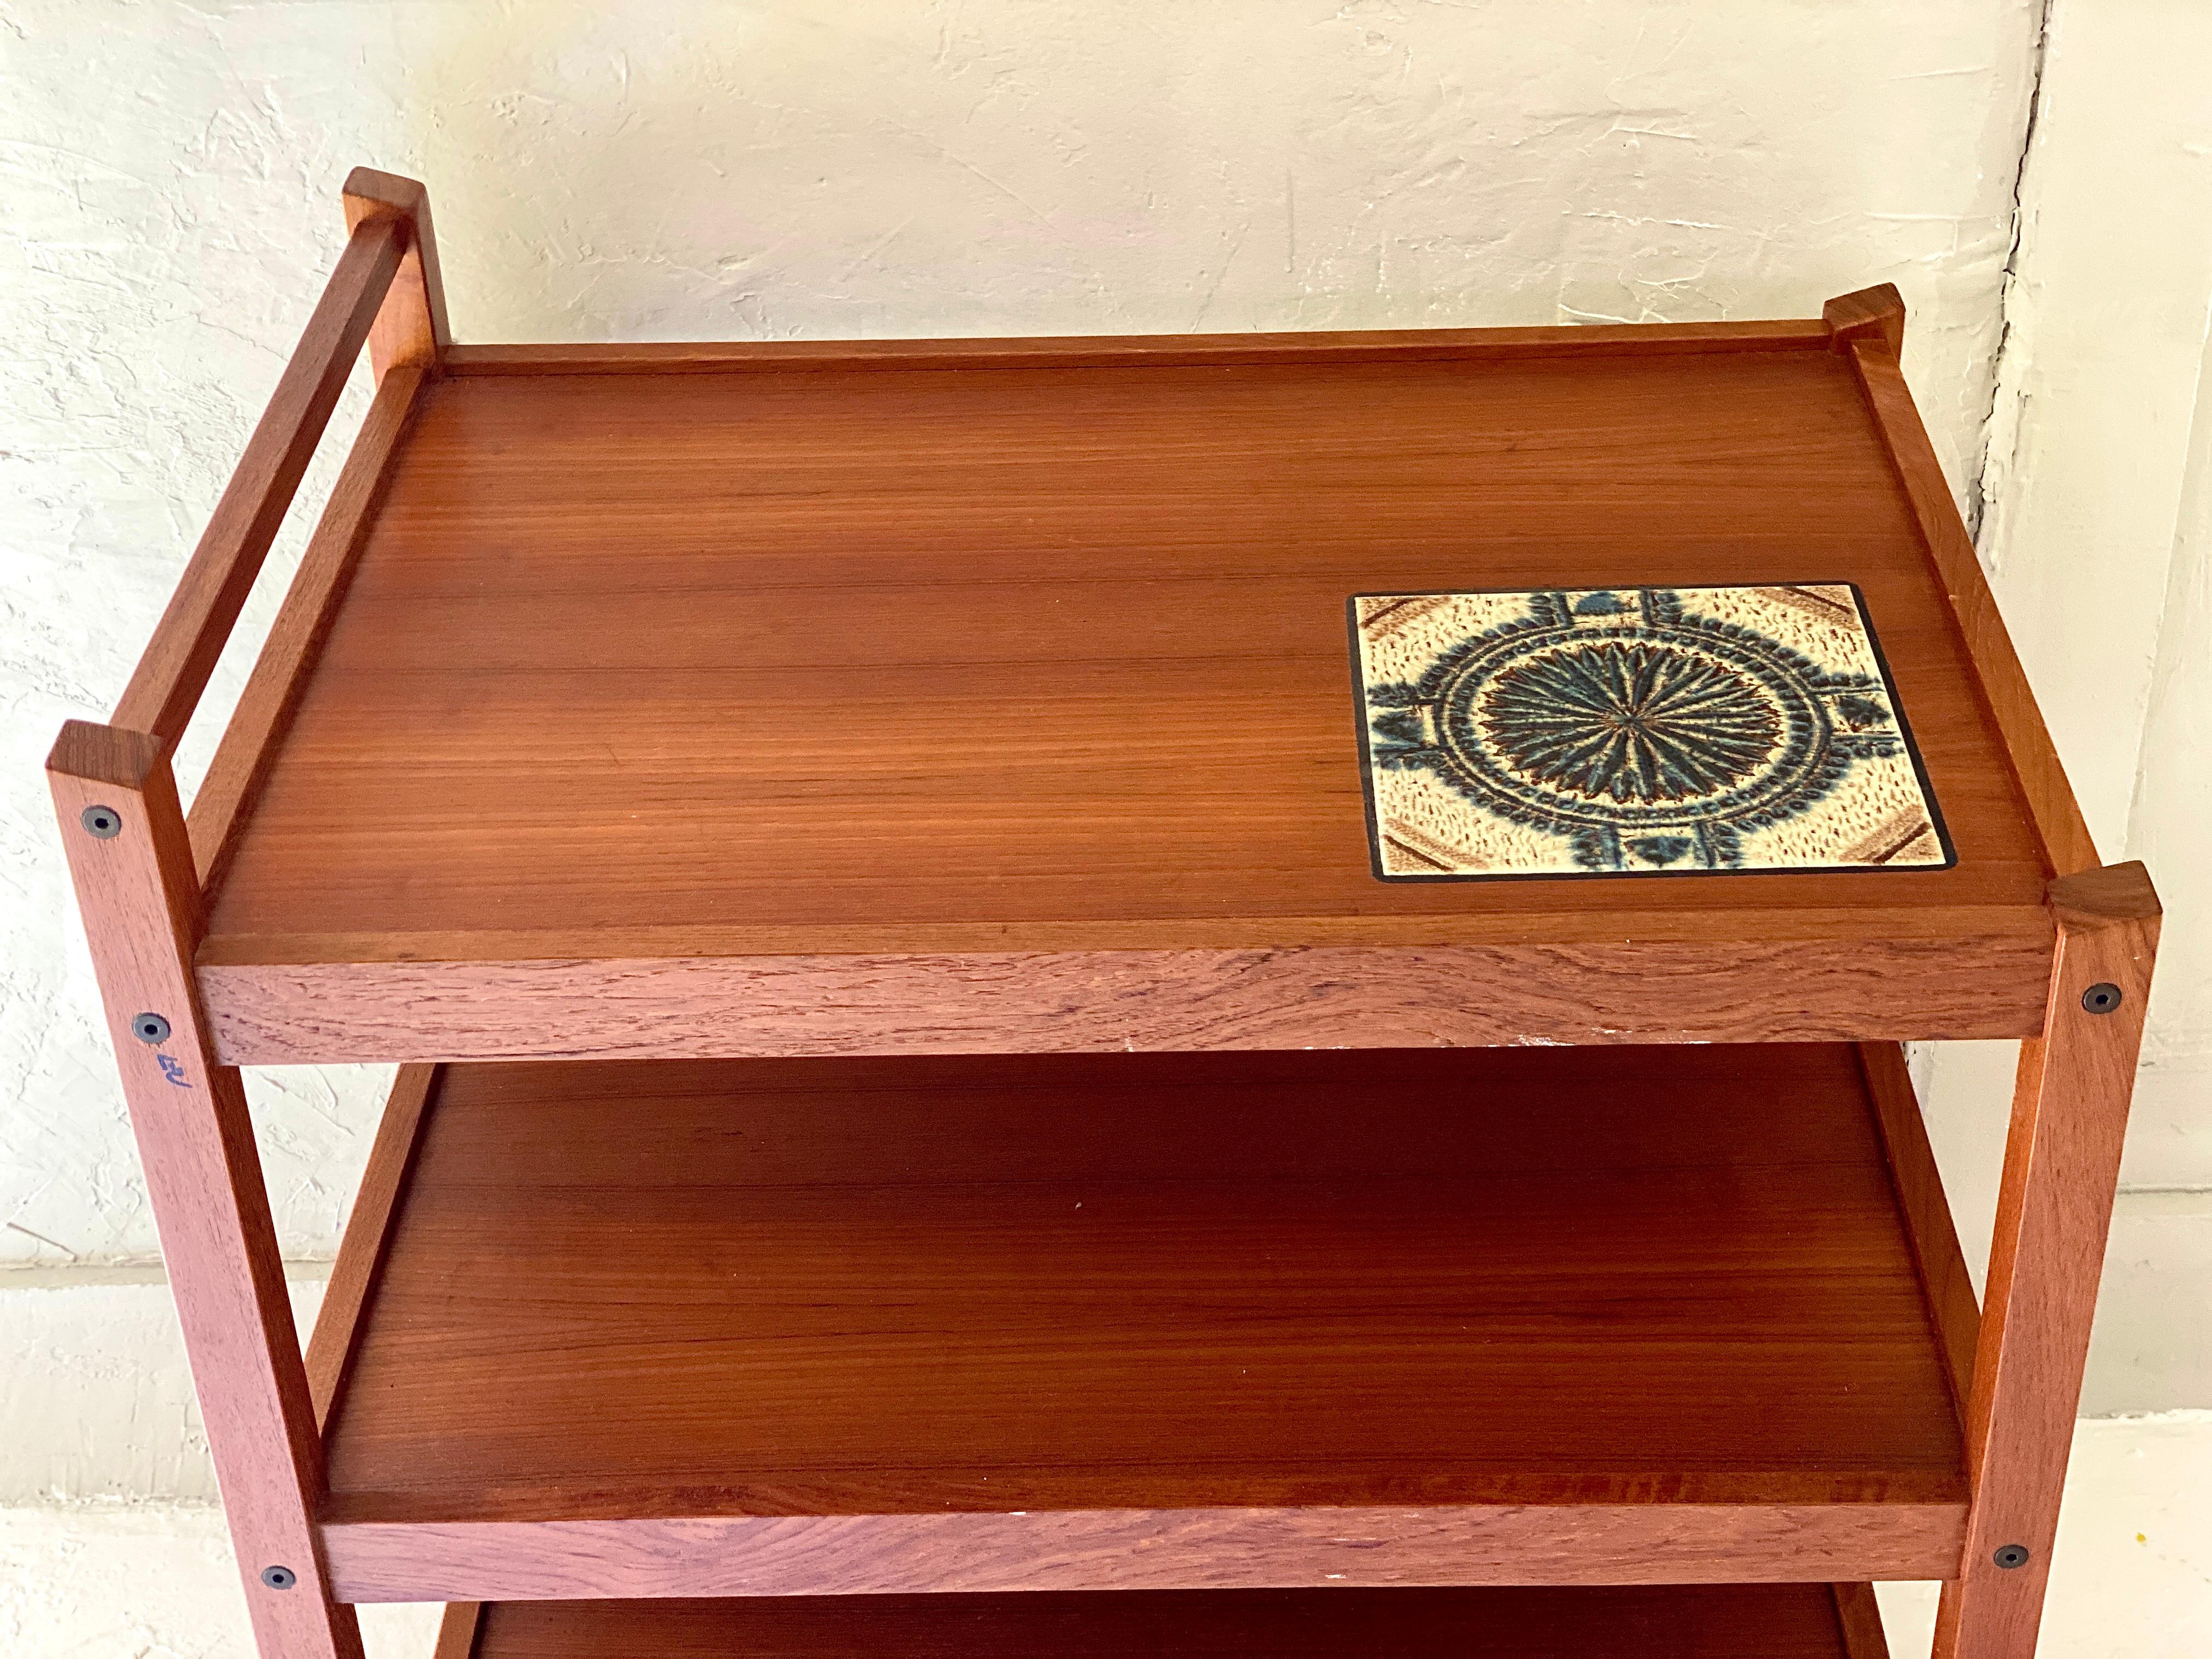 Mid-Century Modern rolling teak bar / tea cart on Casters with Tile on top shelf. This modern style bar cart has 3 shelves and a top handle to easily move from room to room while entertaining guests. The top tile can be used for putting a bottle of